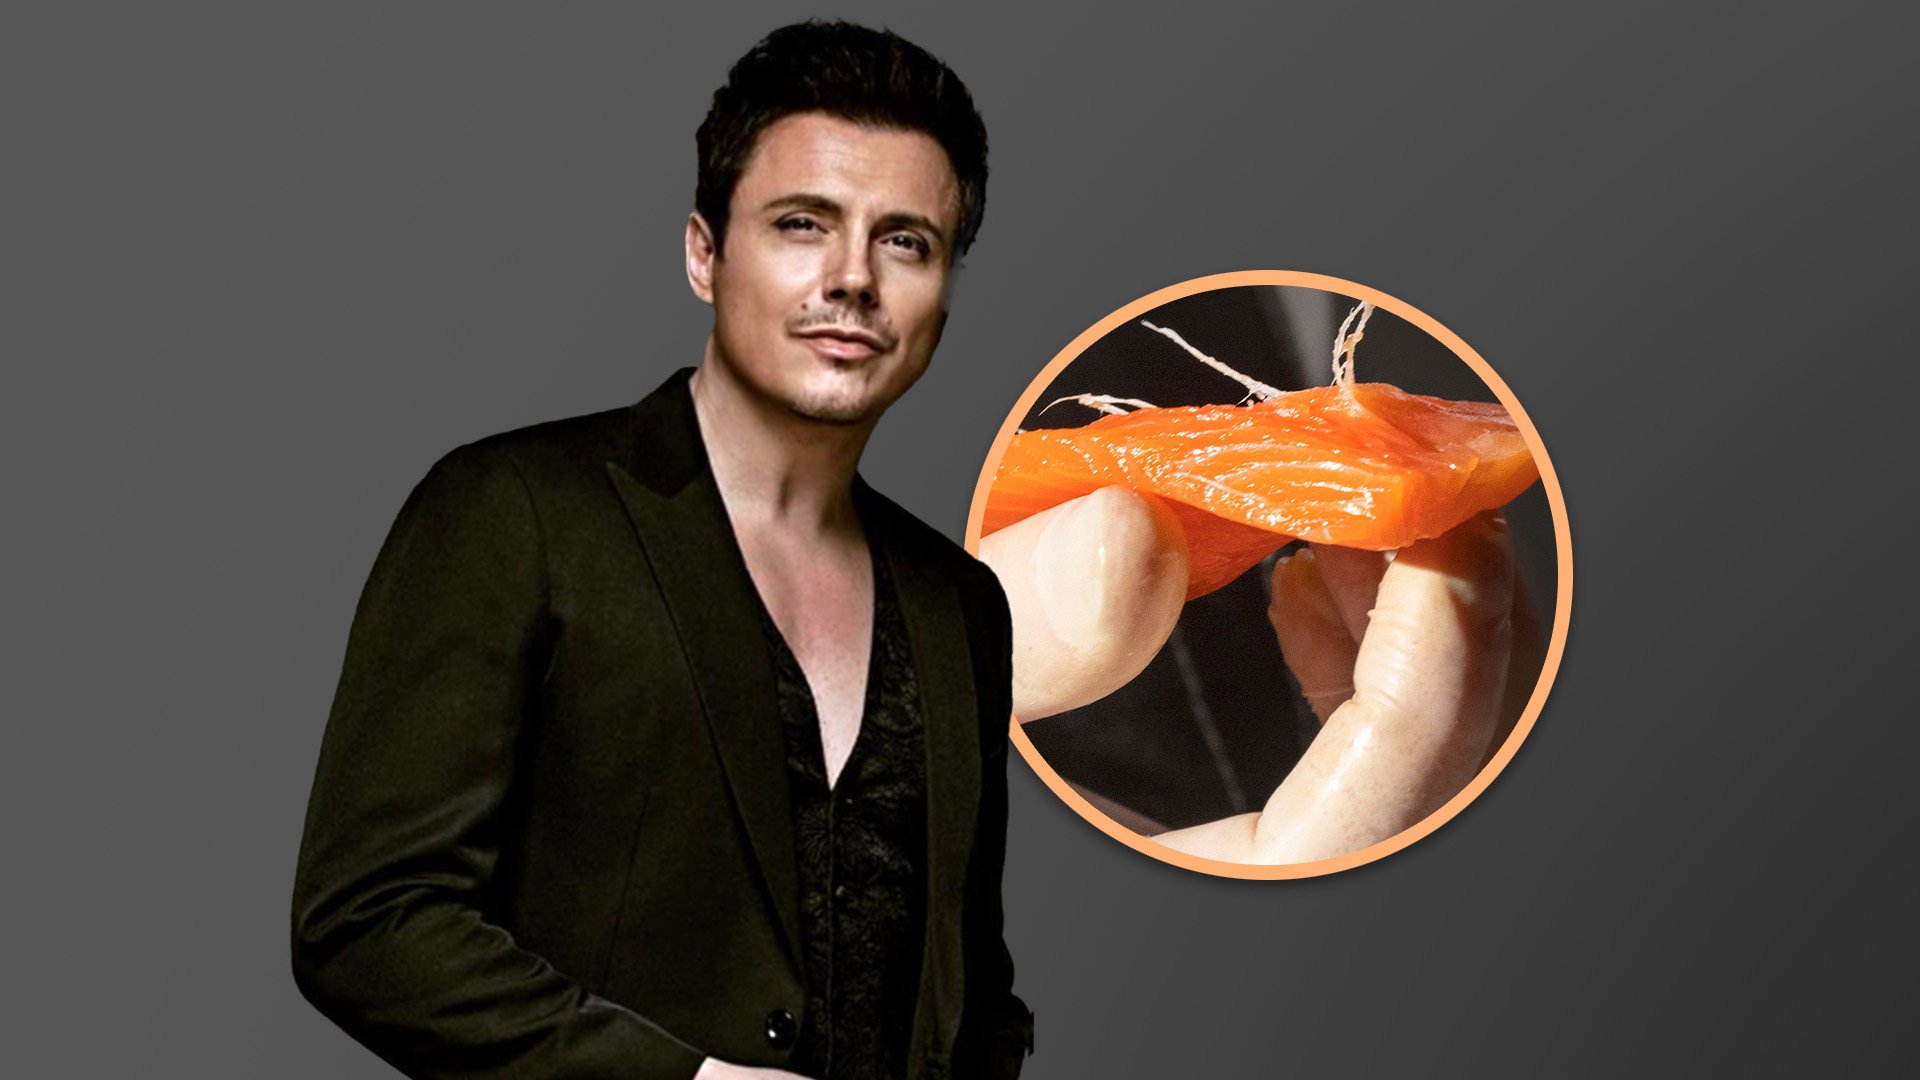 French rock opera singer Laurent Ban has praised the skills of a Shanghai doctor who was able to quickly remove a fish bone from his throat, thereby literally saving the show. Photo: SCMP composite/Shutterstock/IG@laurent_ban_off